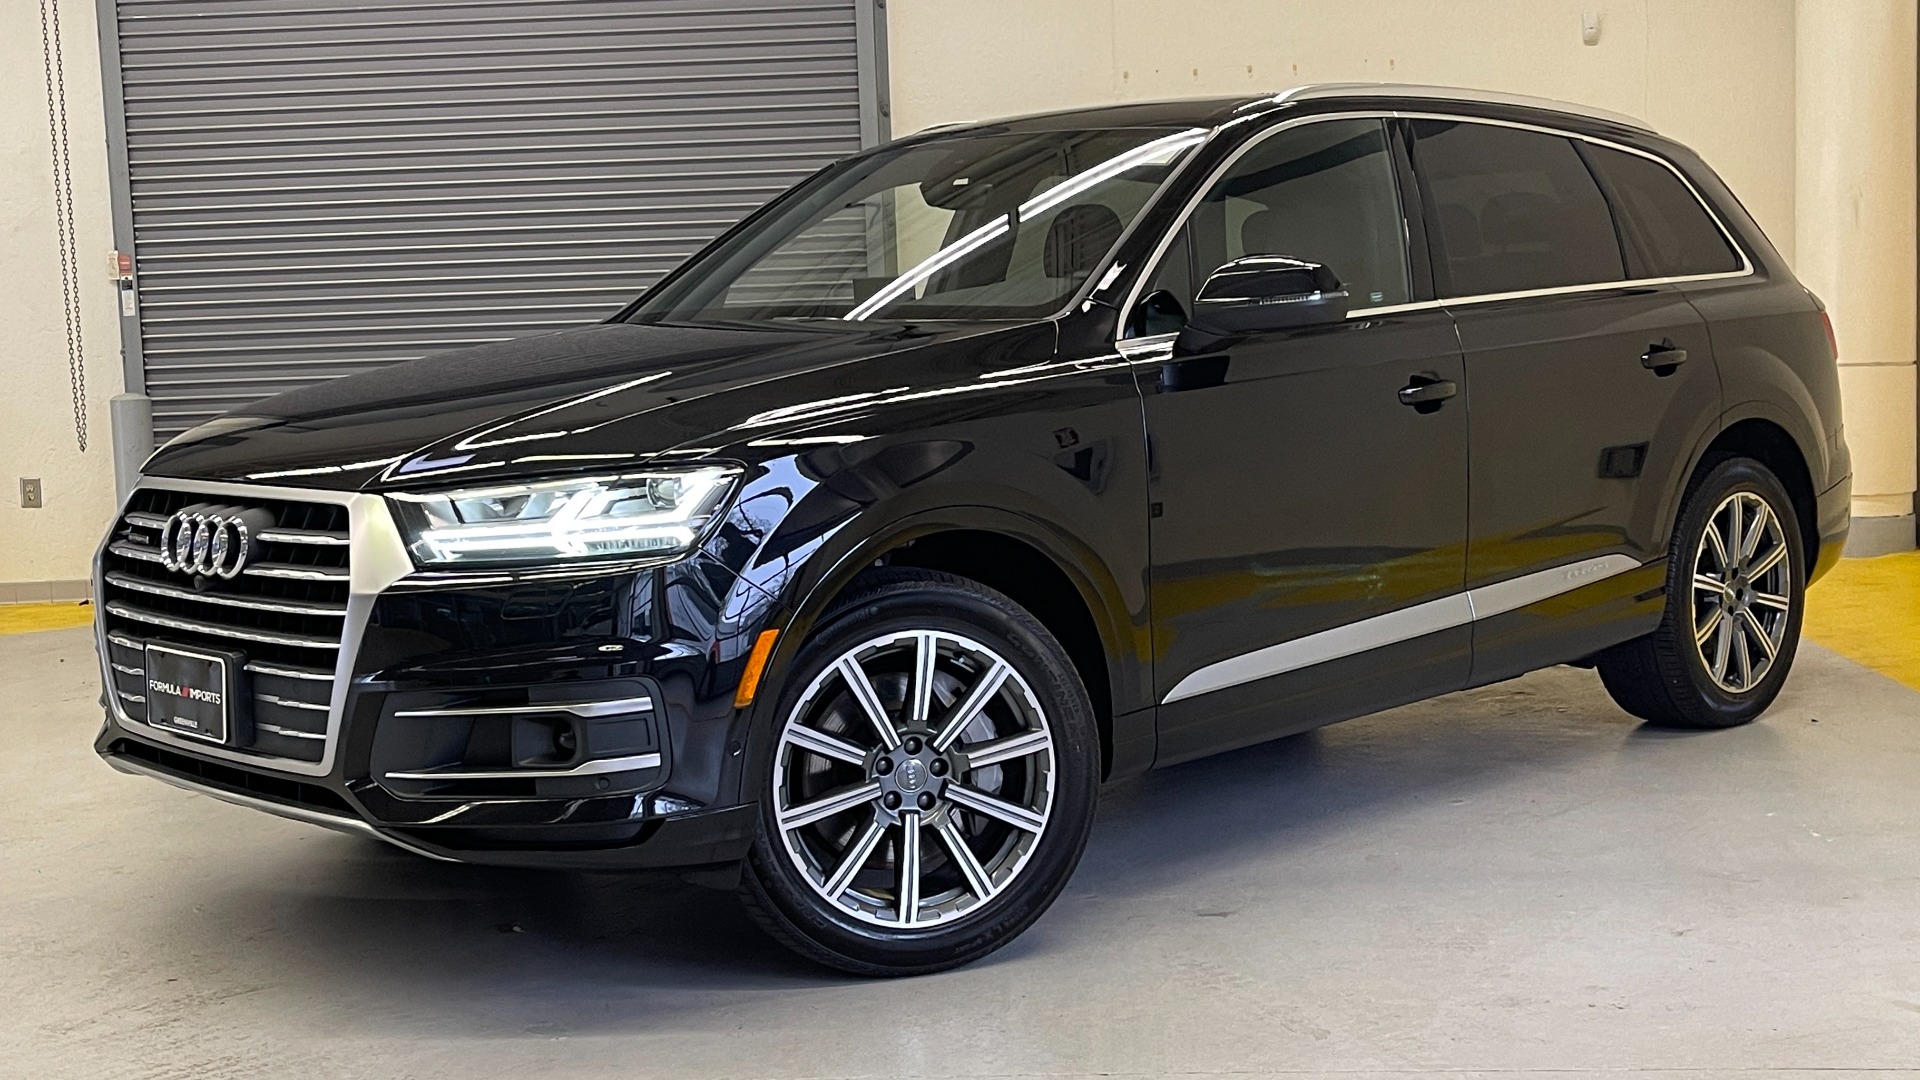 Used 2019 Audi Q7 PREMIUM PLUS / NAV / SUNROOF / DRVR ASST / COLD WTHR / 20IN WHLS / REARVIEW for sale $51,795 at Formula Imports in Charlotte NC 28227 1